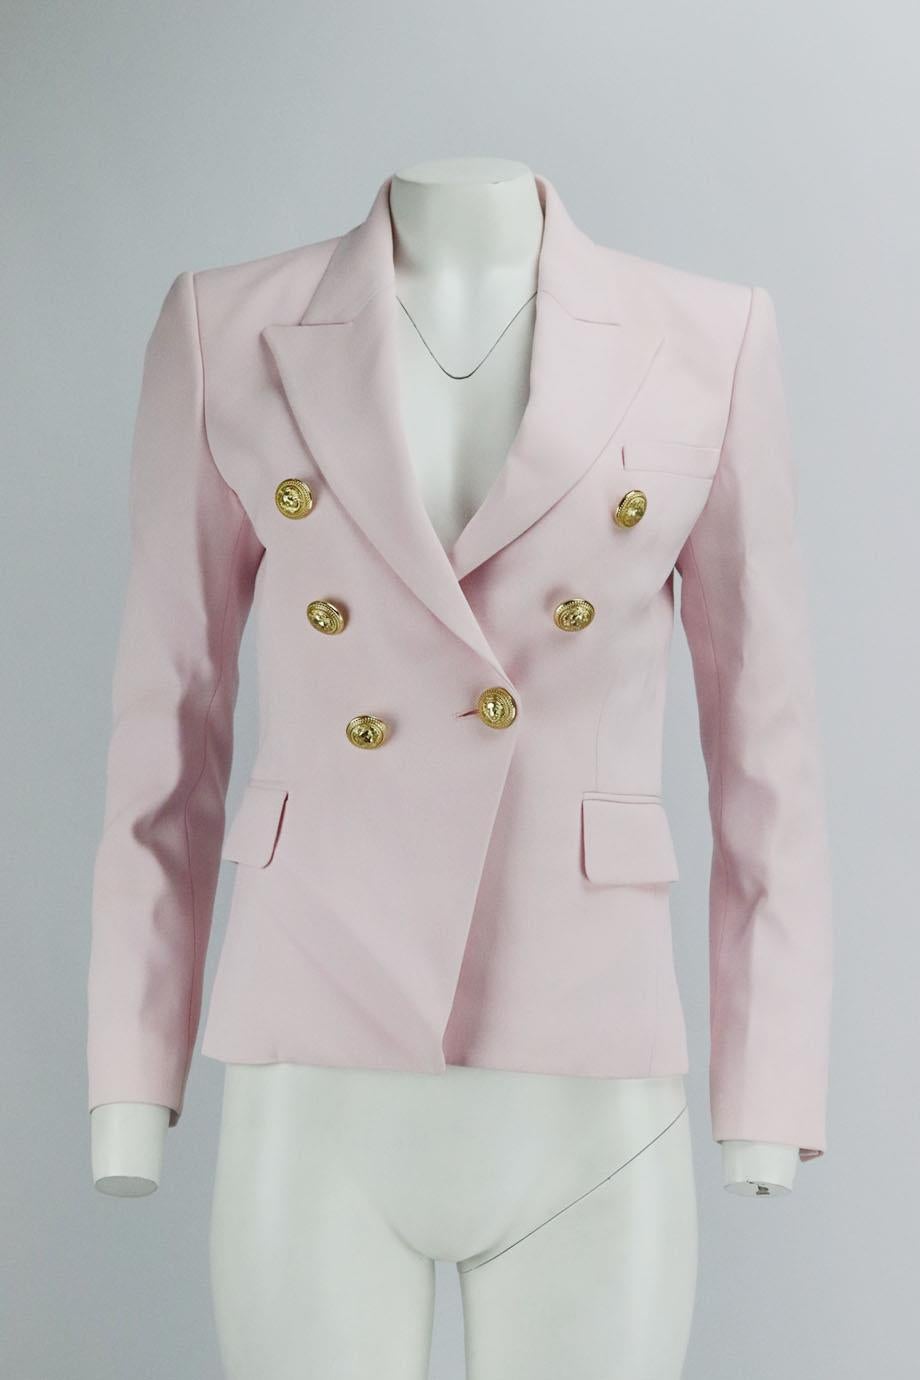 Balmain double breasted crepe blazer. Pink. Long sleeve, v-neck. Button fastening at front. 70% Acetate, 26% viscose, 4% polyurethane; lining: 52% viscose, 48% cotton. Size: FR 38 (UK 10, US 6, IT 42). Shoulder to shoulder: 15 in. Bust: 34 in.